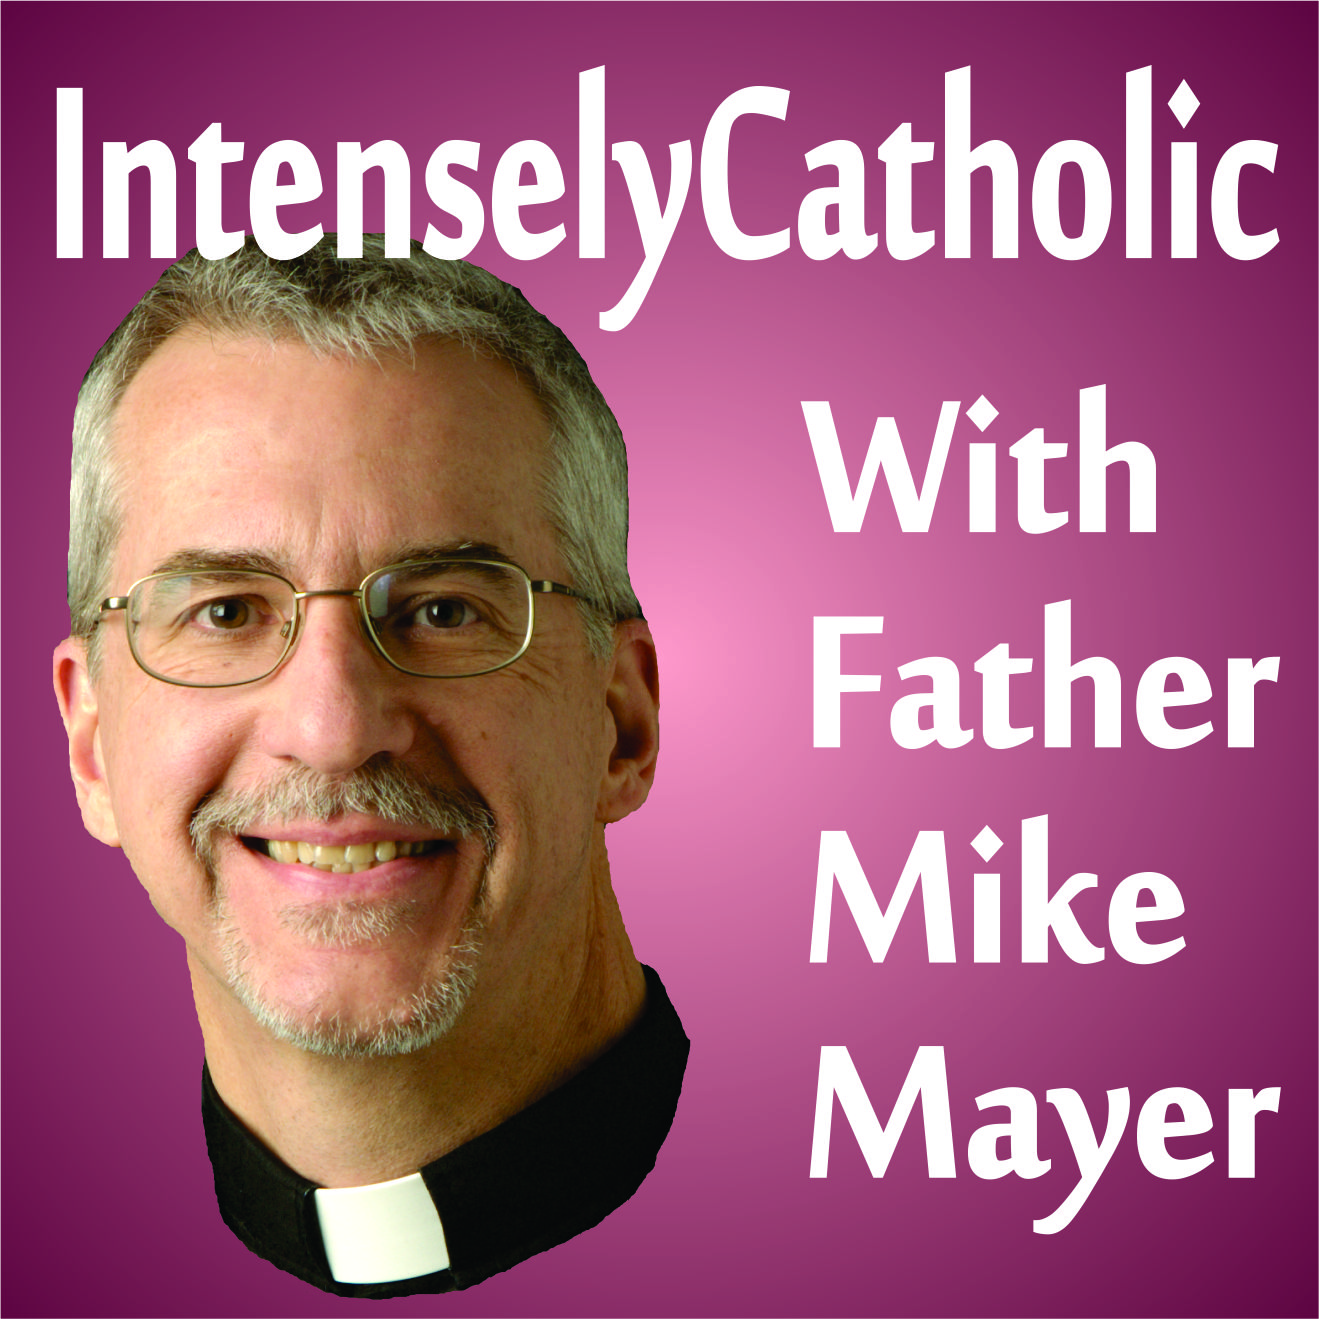 6th Sunday in Ordinary Time Homily by Fr. Mike Mayer